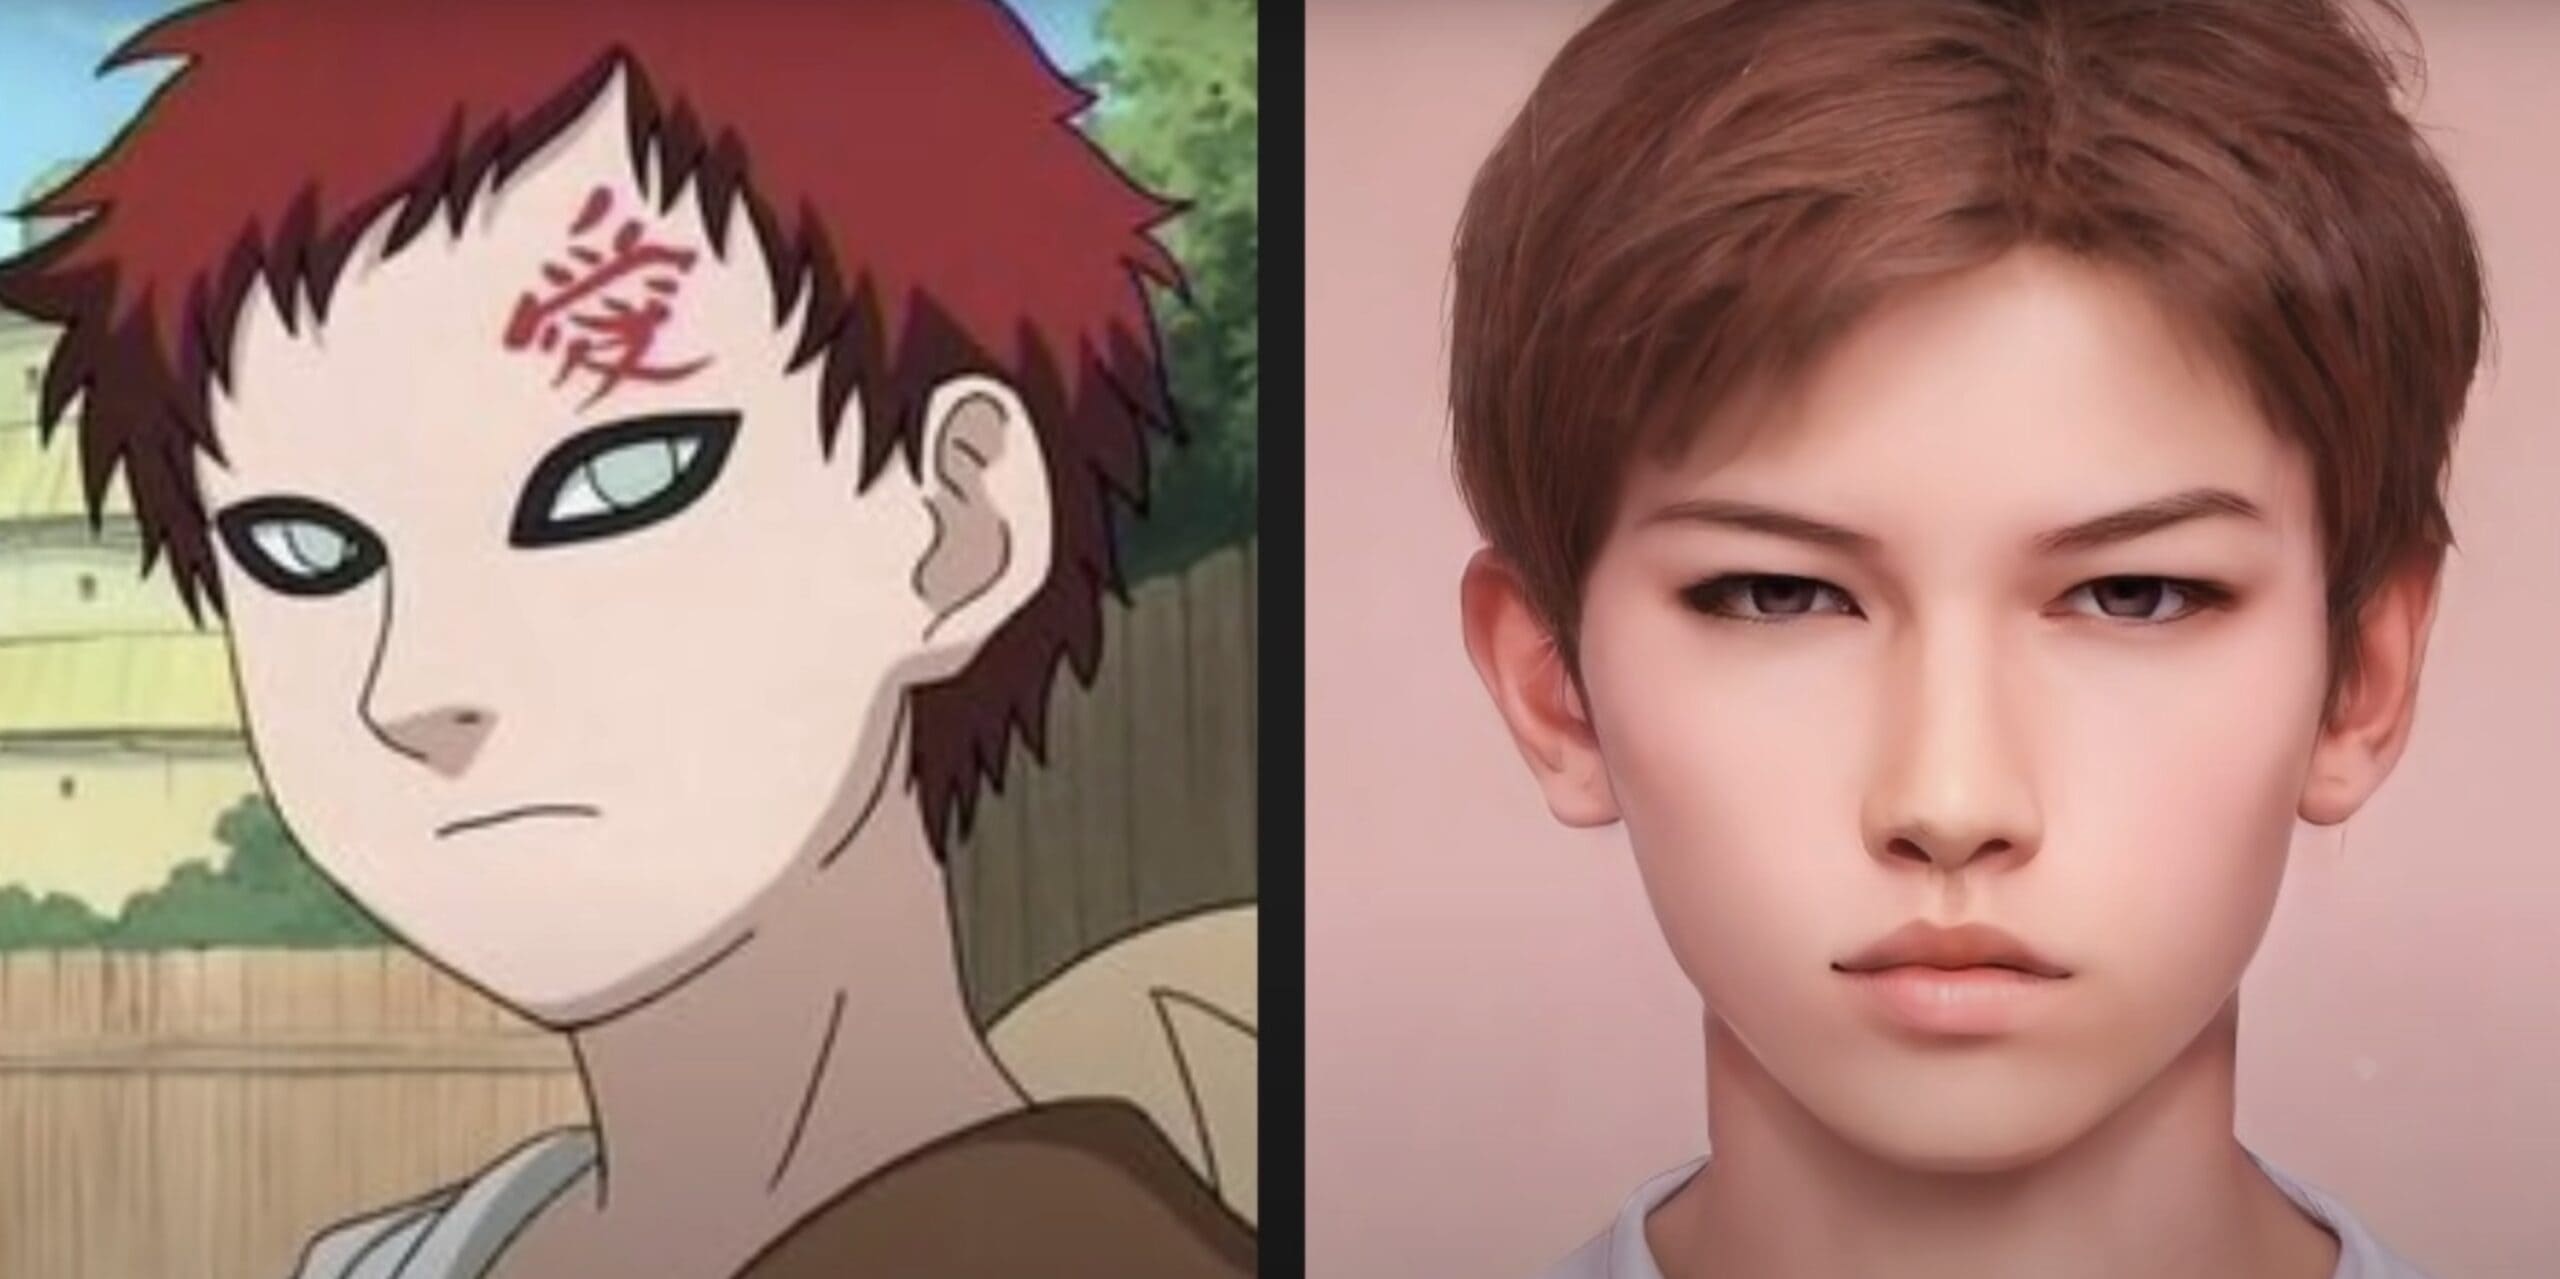 20 Naruto Characters & How They Would Look In Real Life